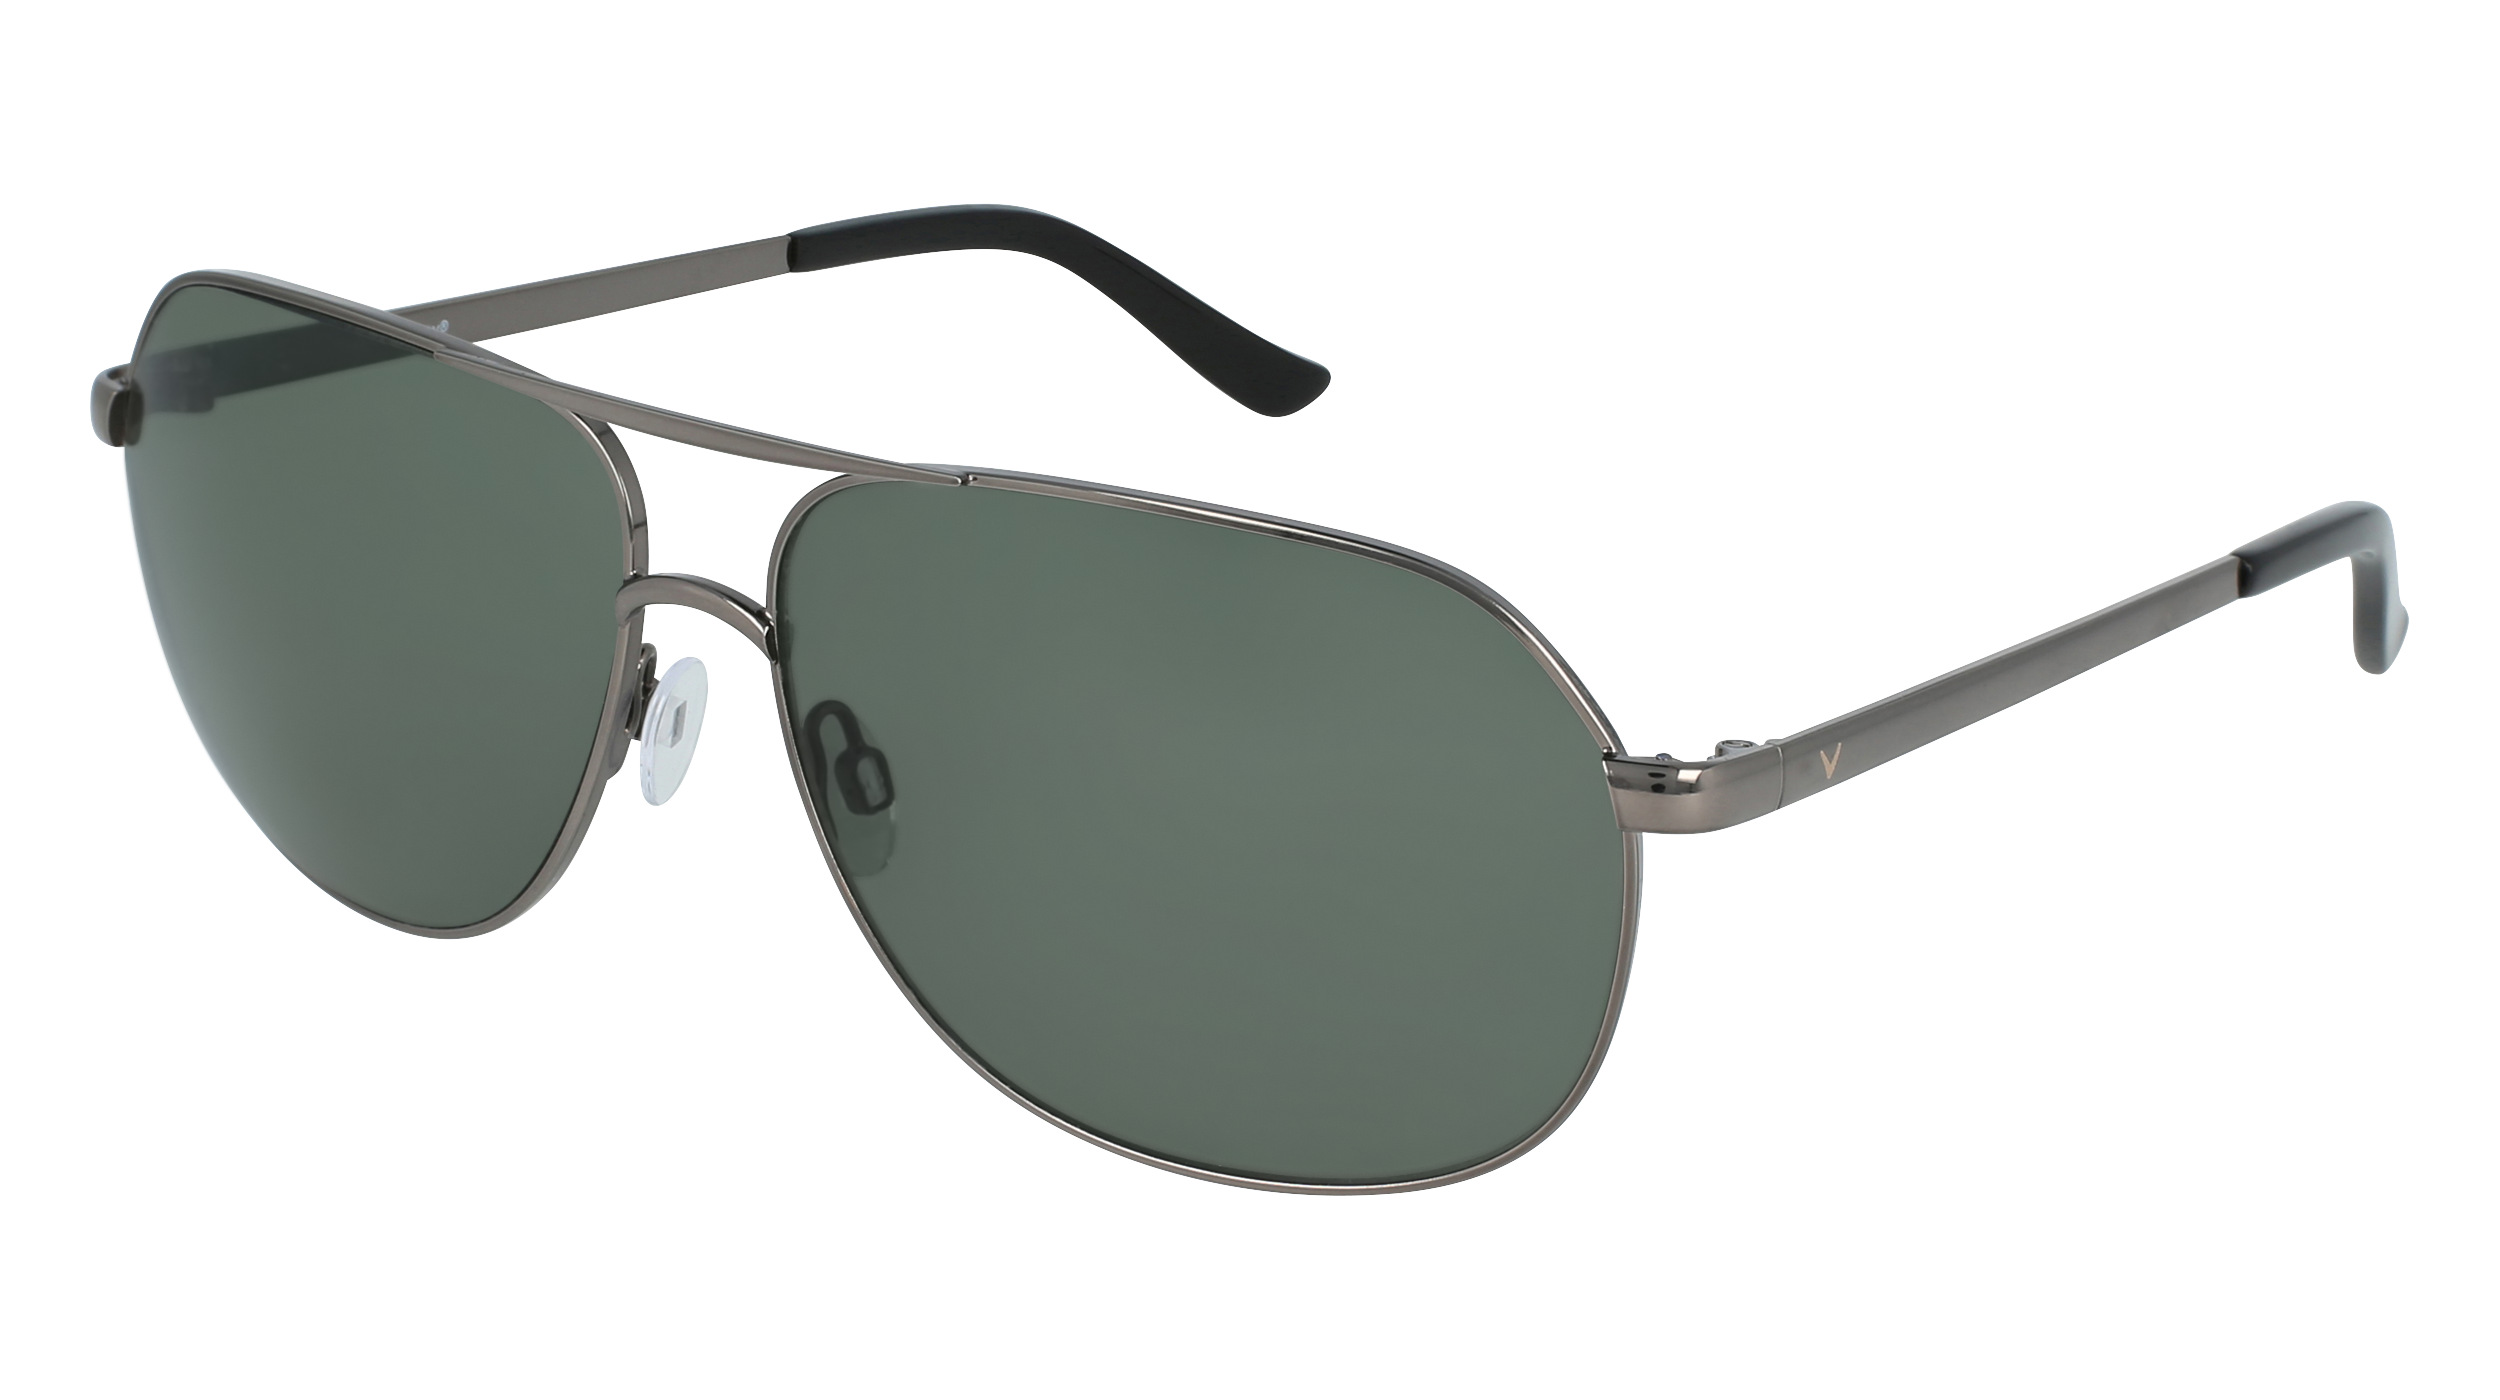 C C 09 men's sunglasses (from the side)